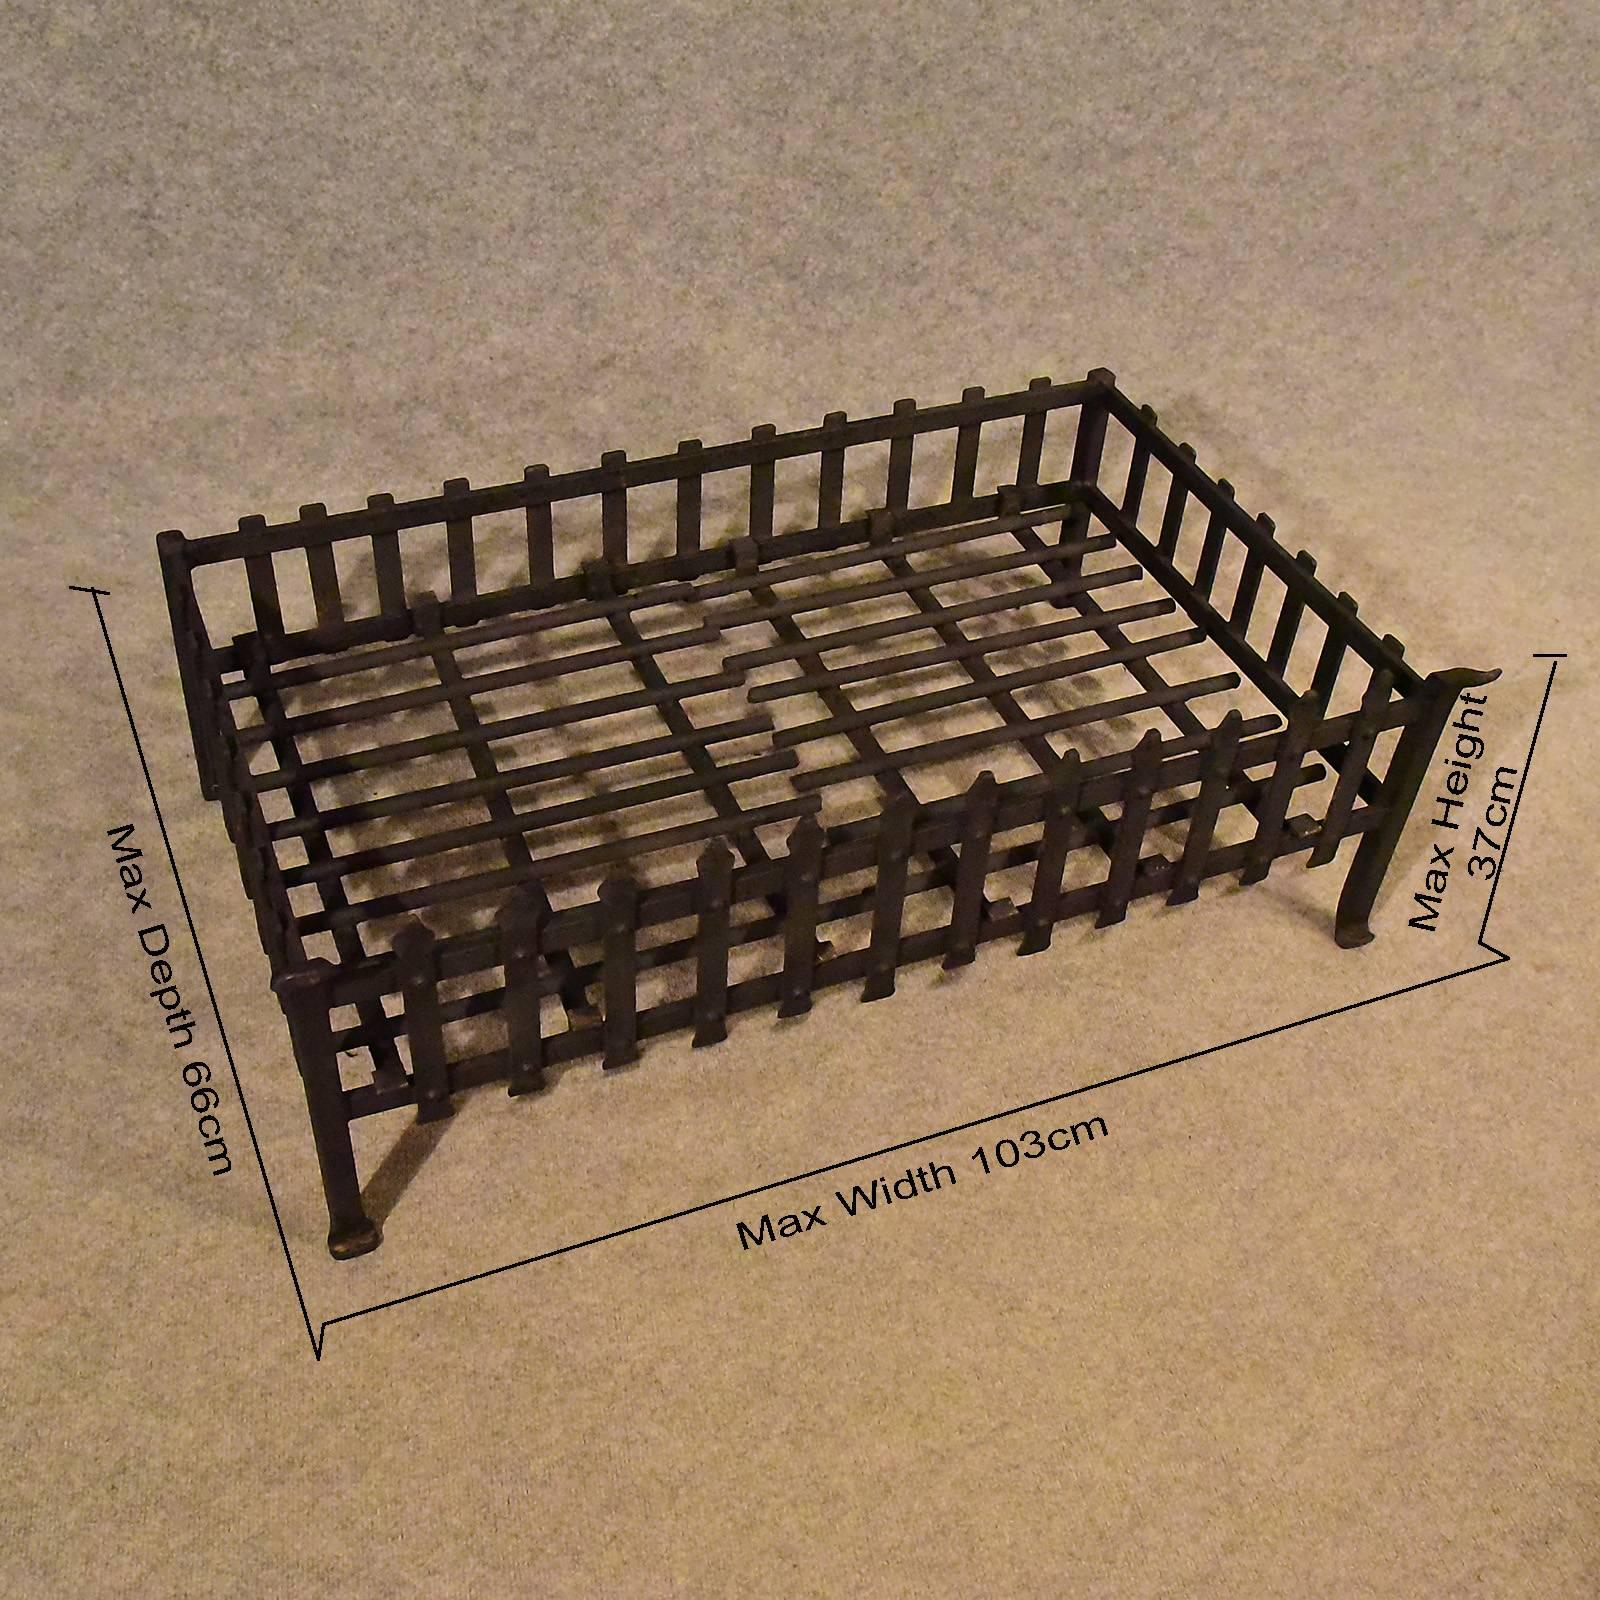 A pleasing fire grate presented in very good antique condition
Of large proportions
In lovely hand-forged and cast iron
Quality freestanding basket
Attractive low style standing over squat legs
Suitable for all fuel types
Solidly